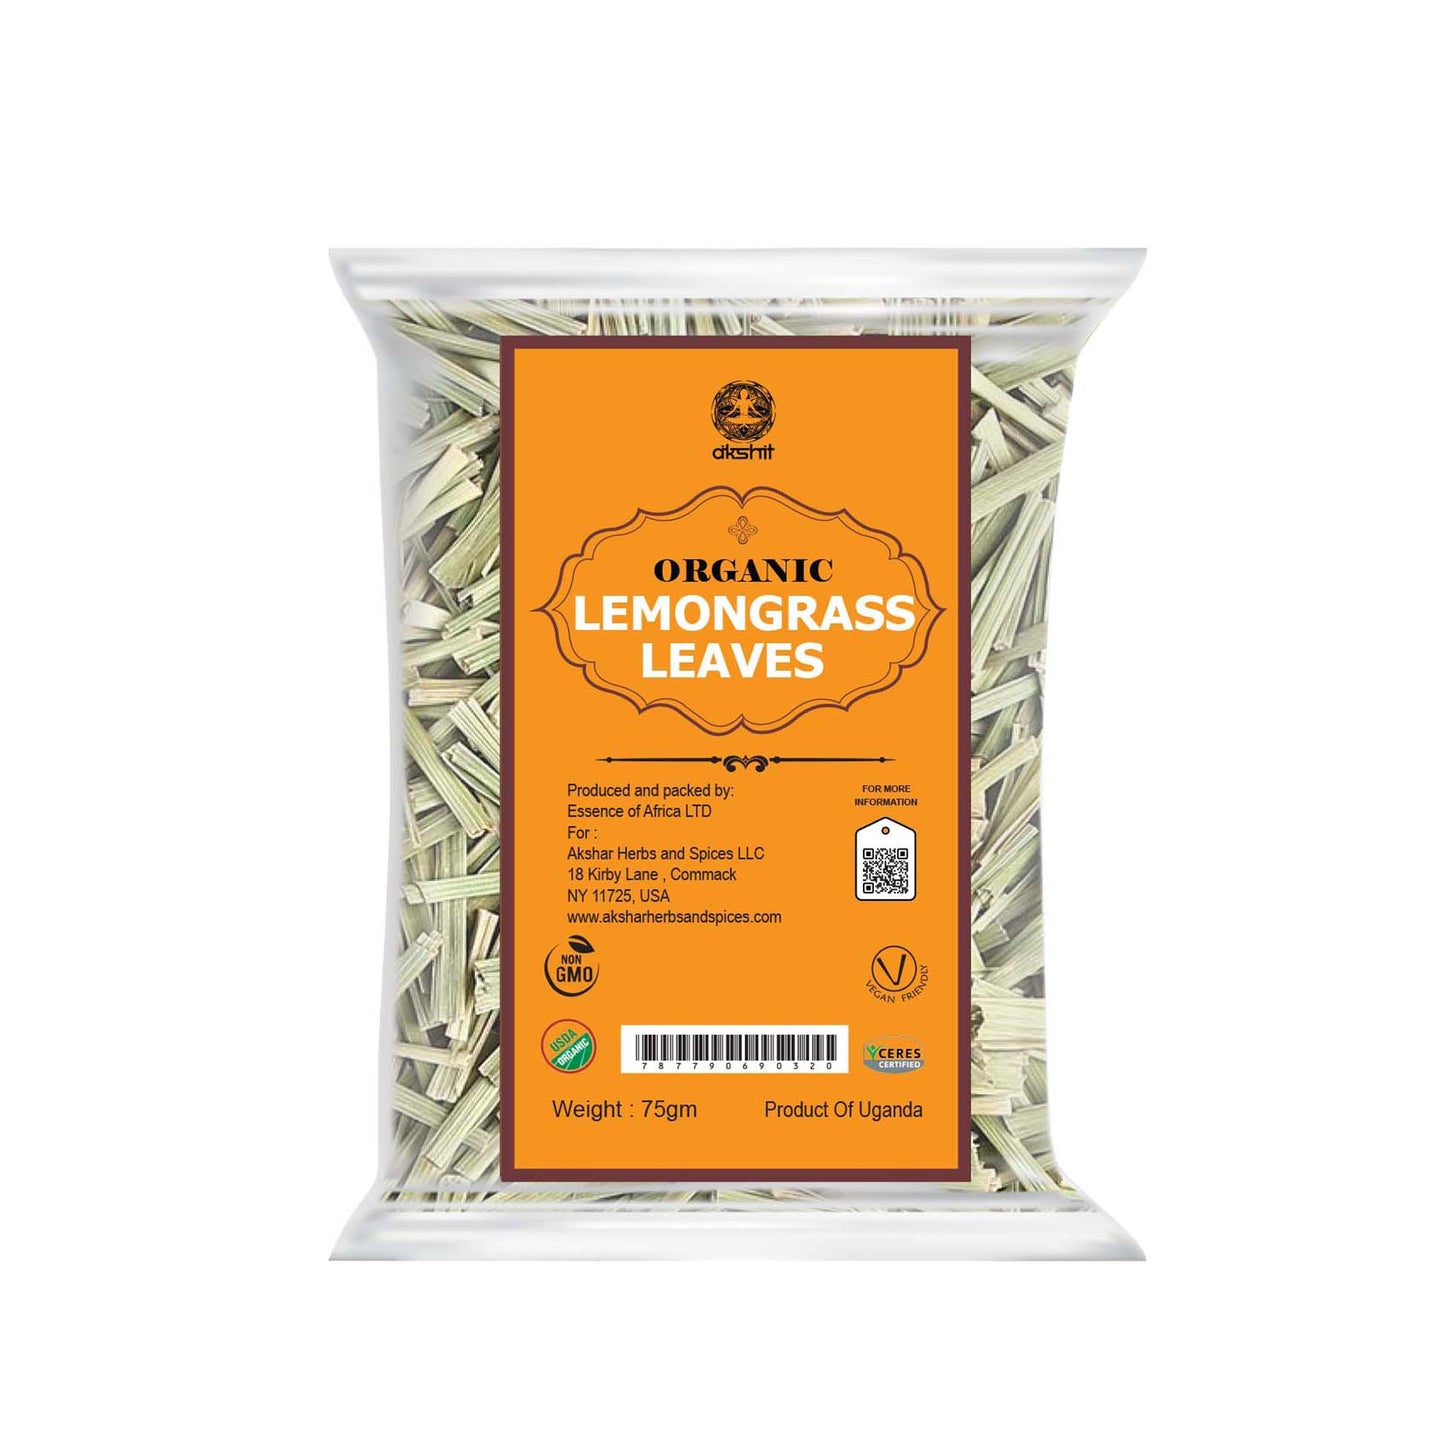 Our Lemongrass tea is crafted from the leaves of the Cymbopogon citratus plant. Known for its unique profile that combines hints of mint and citrusy lemon, this tea offers a light and fresh taste with an invigorating aroma. Enjoy this caffeine-free delight at any time of the day, knowing it's made from pure ingredients.